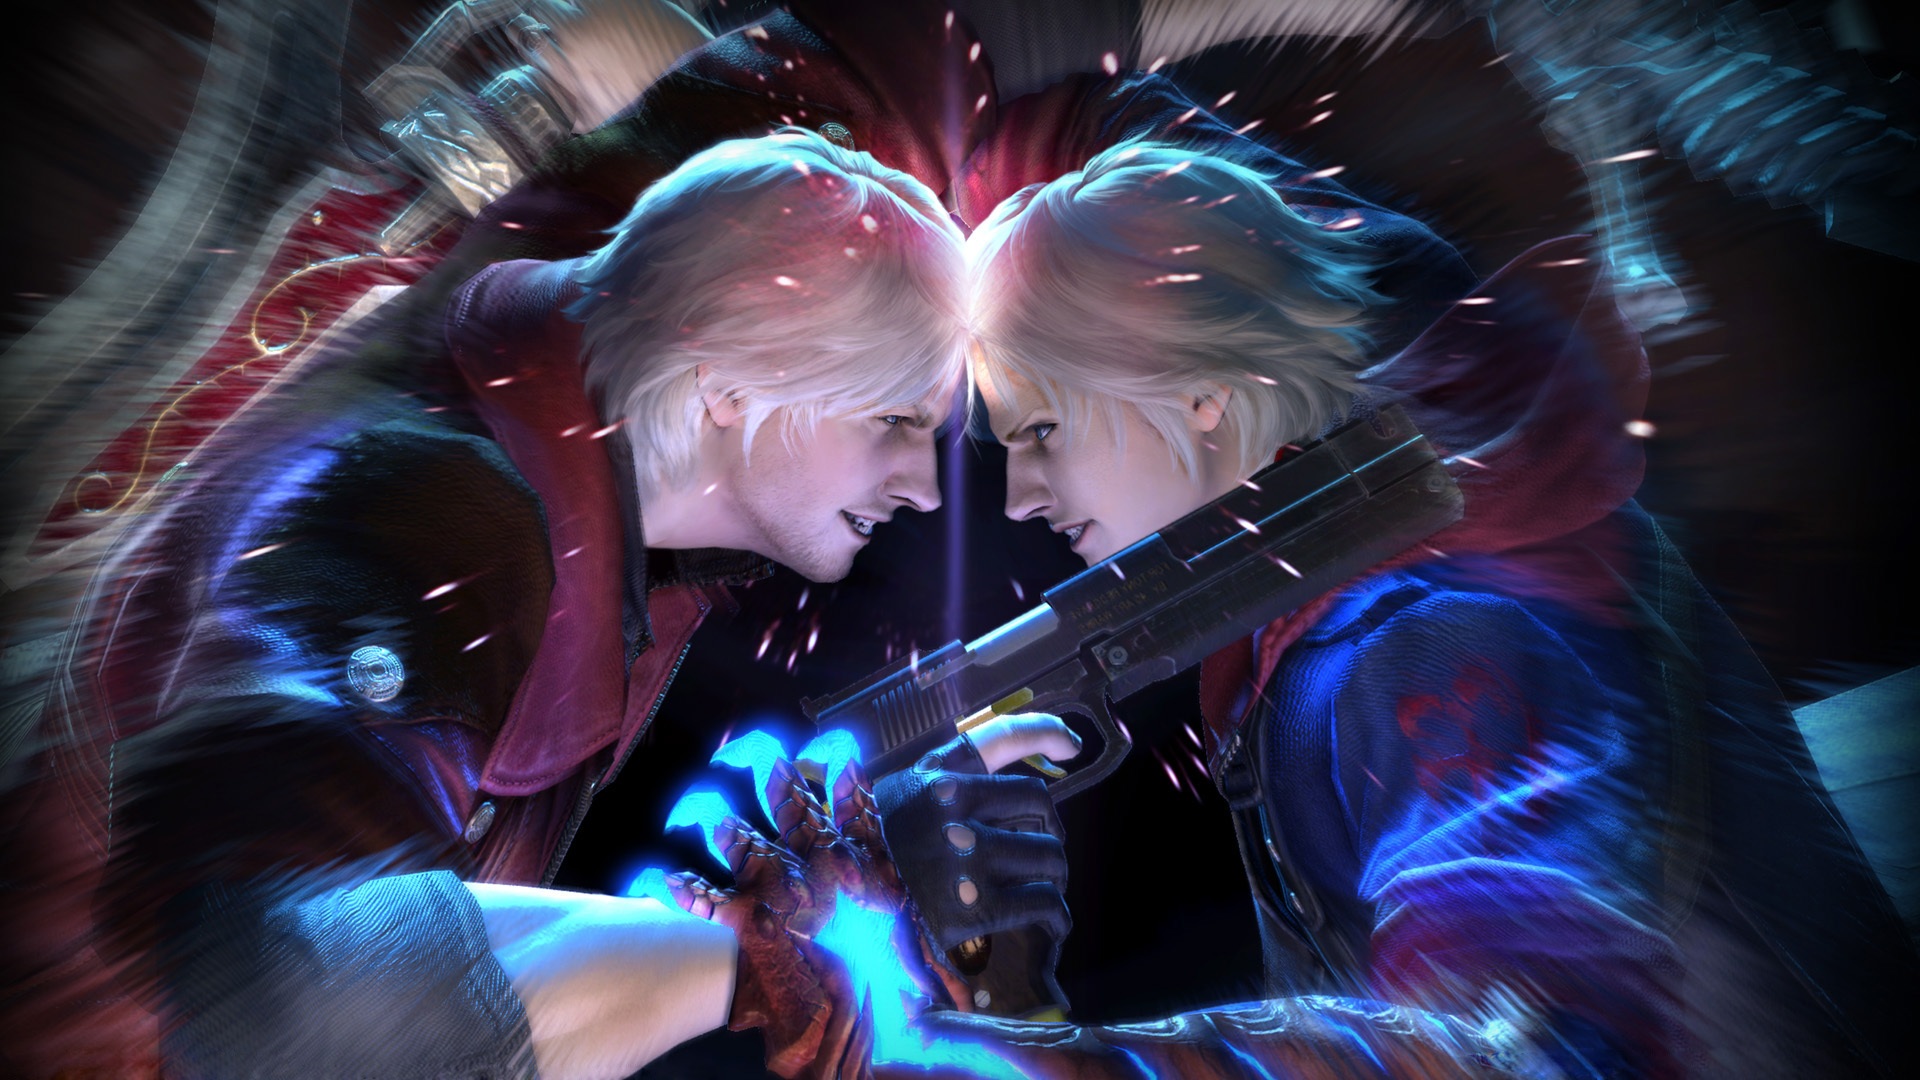  of Devil May Cry 4 You are downloading Devil May Cry 4 wallpaper 2 1920x1080